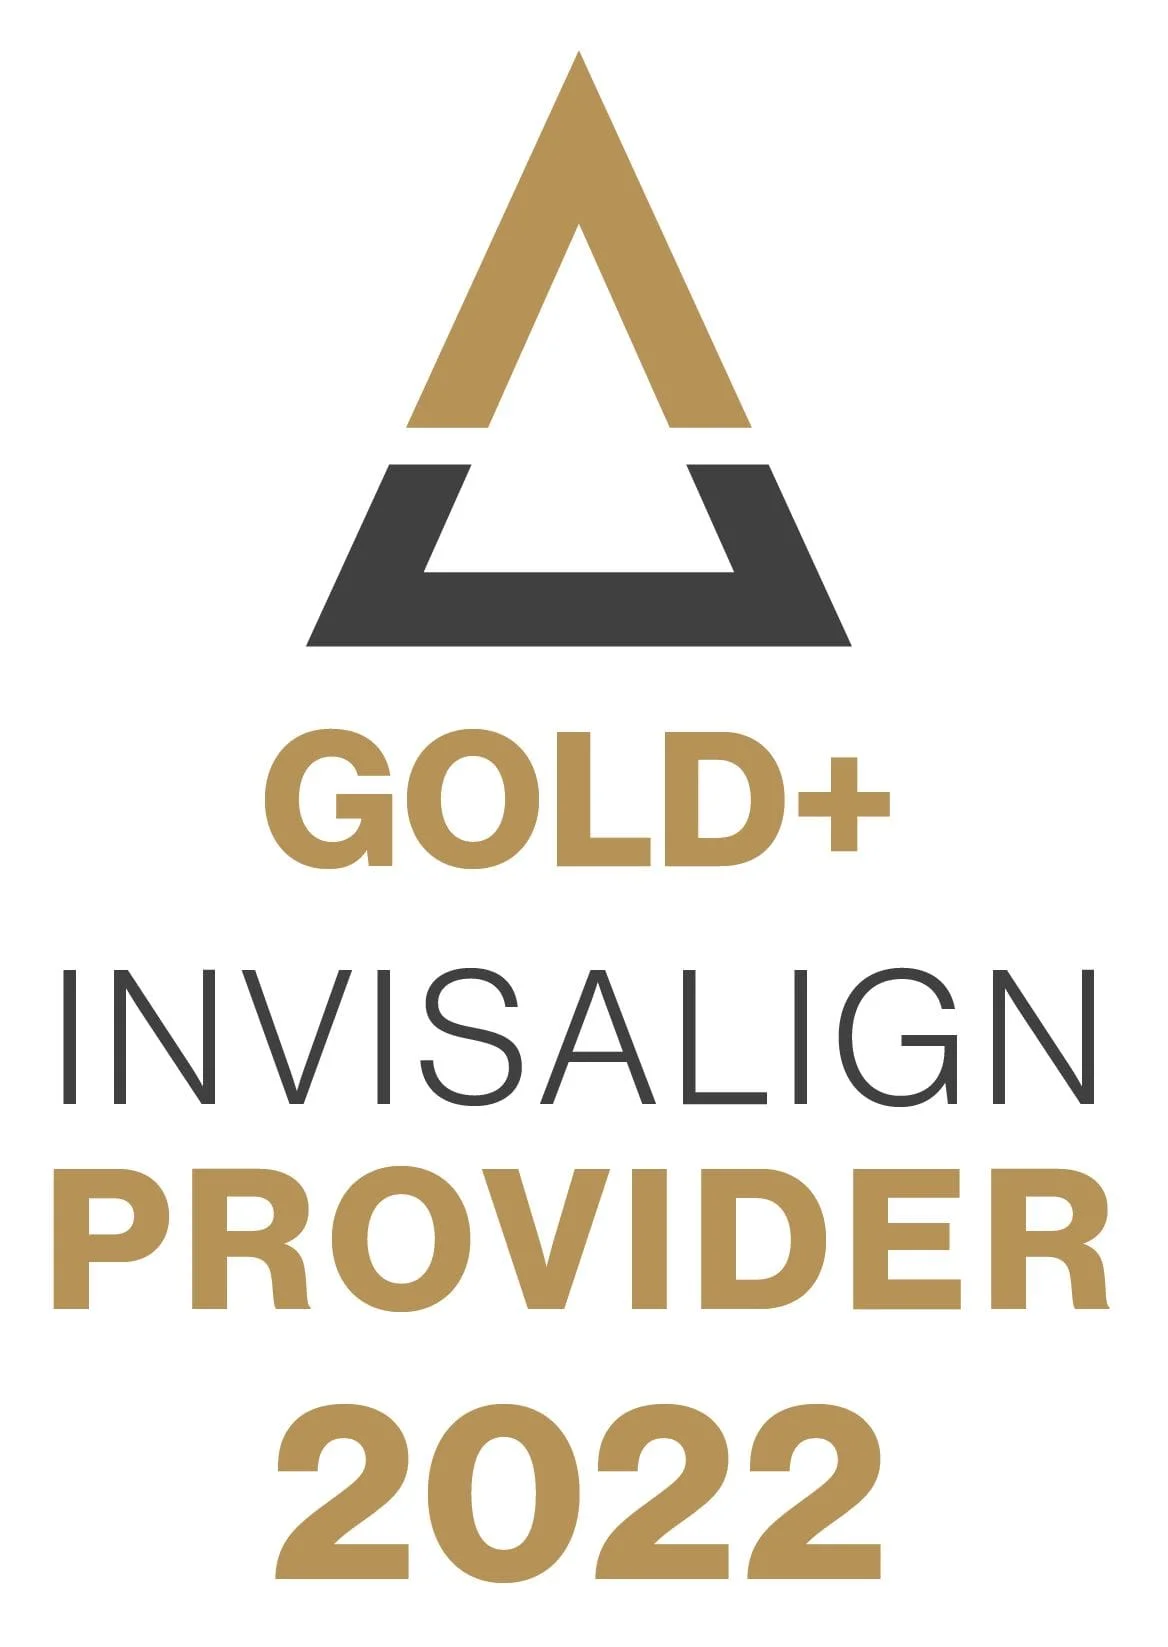 Invisalign Gold Plus Provider | coppell, tx invisalign services | Coppell Smiles | dentist in coppell tx